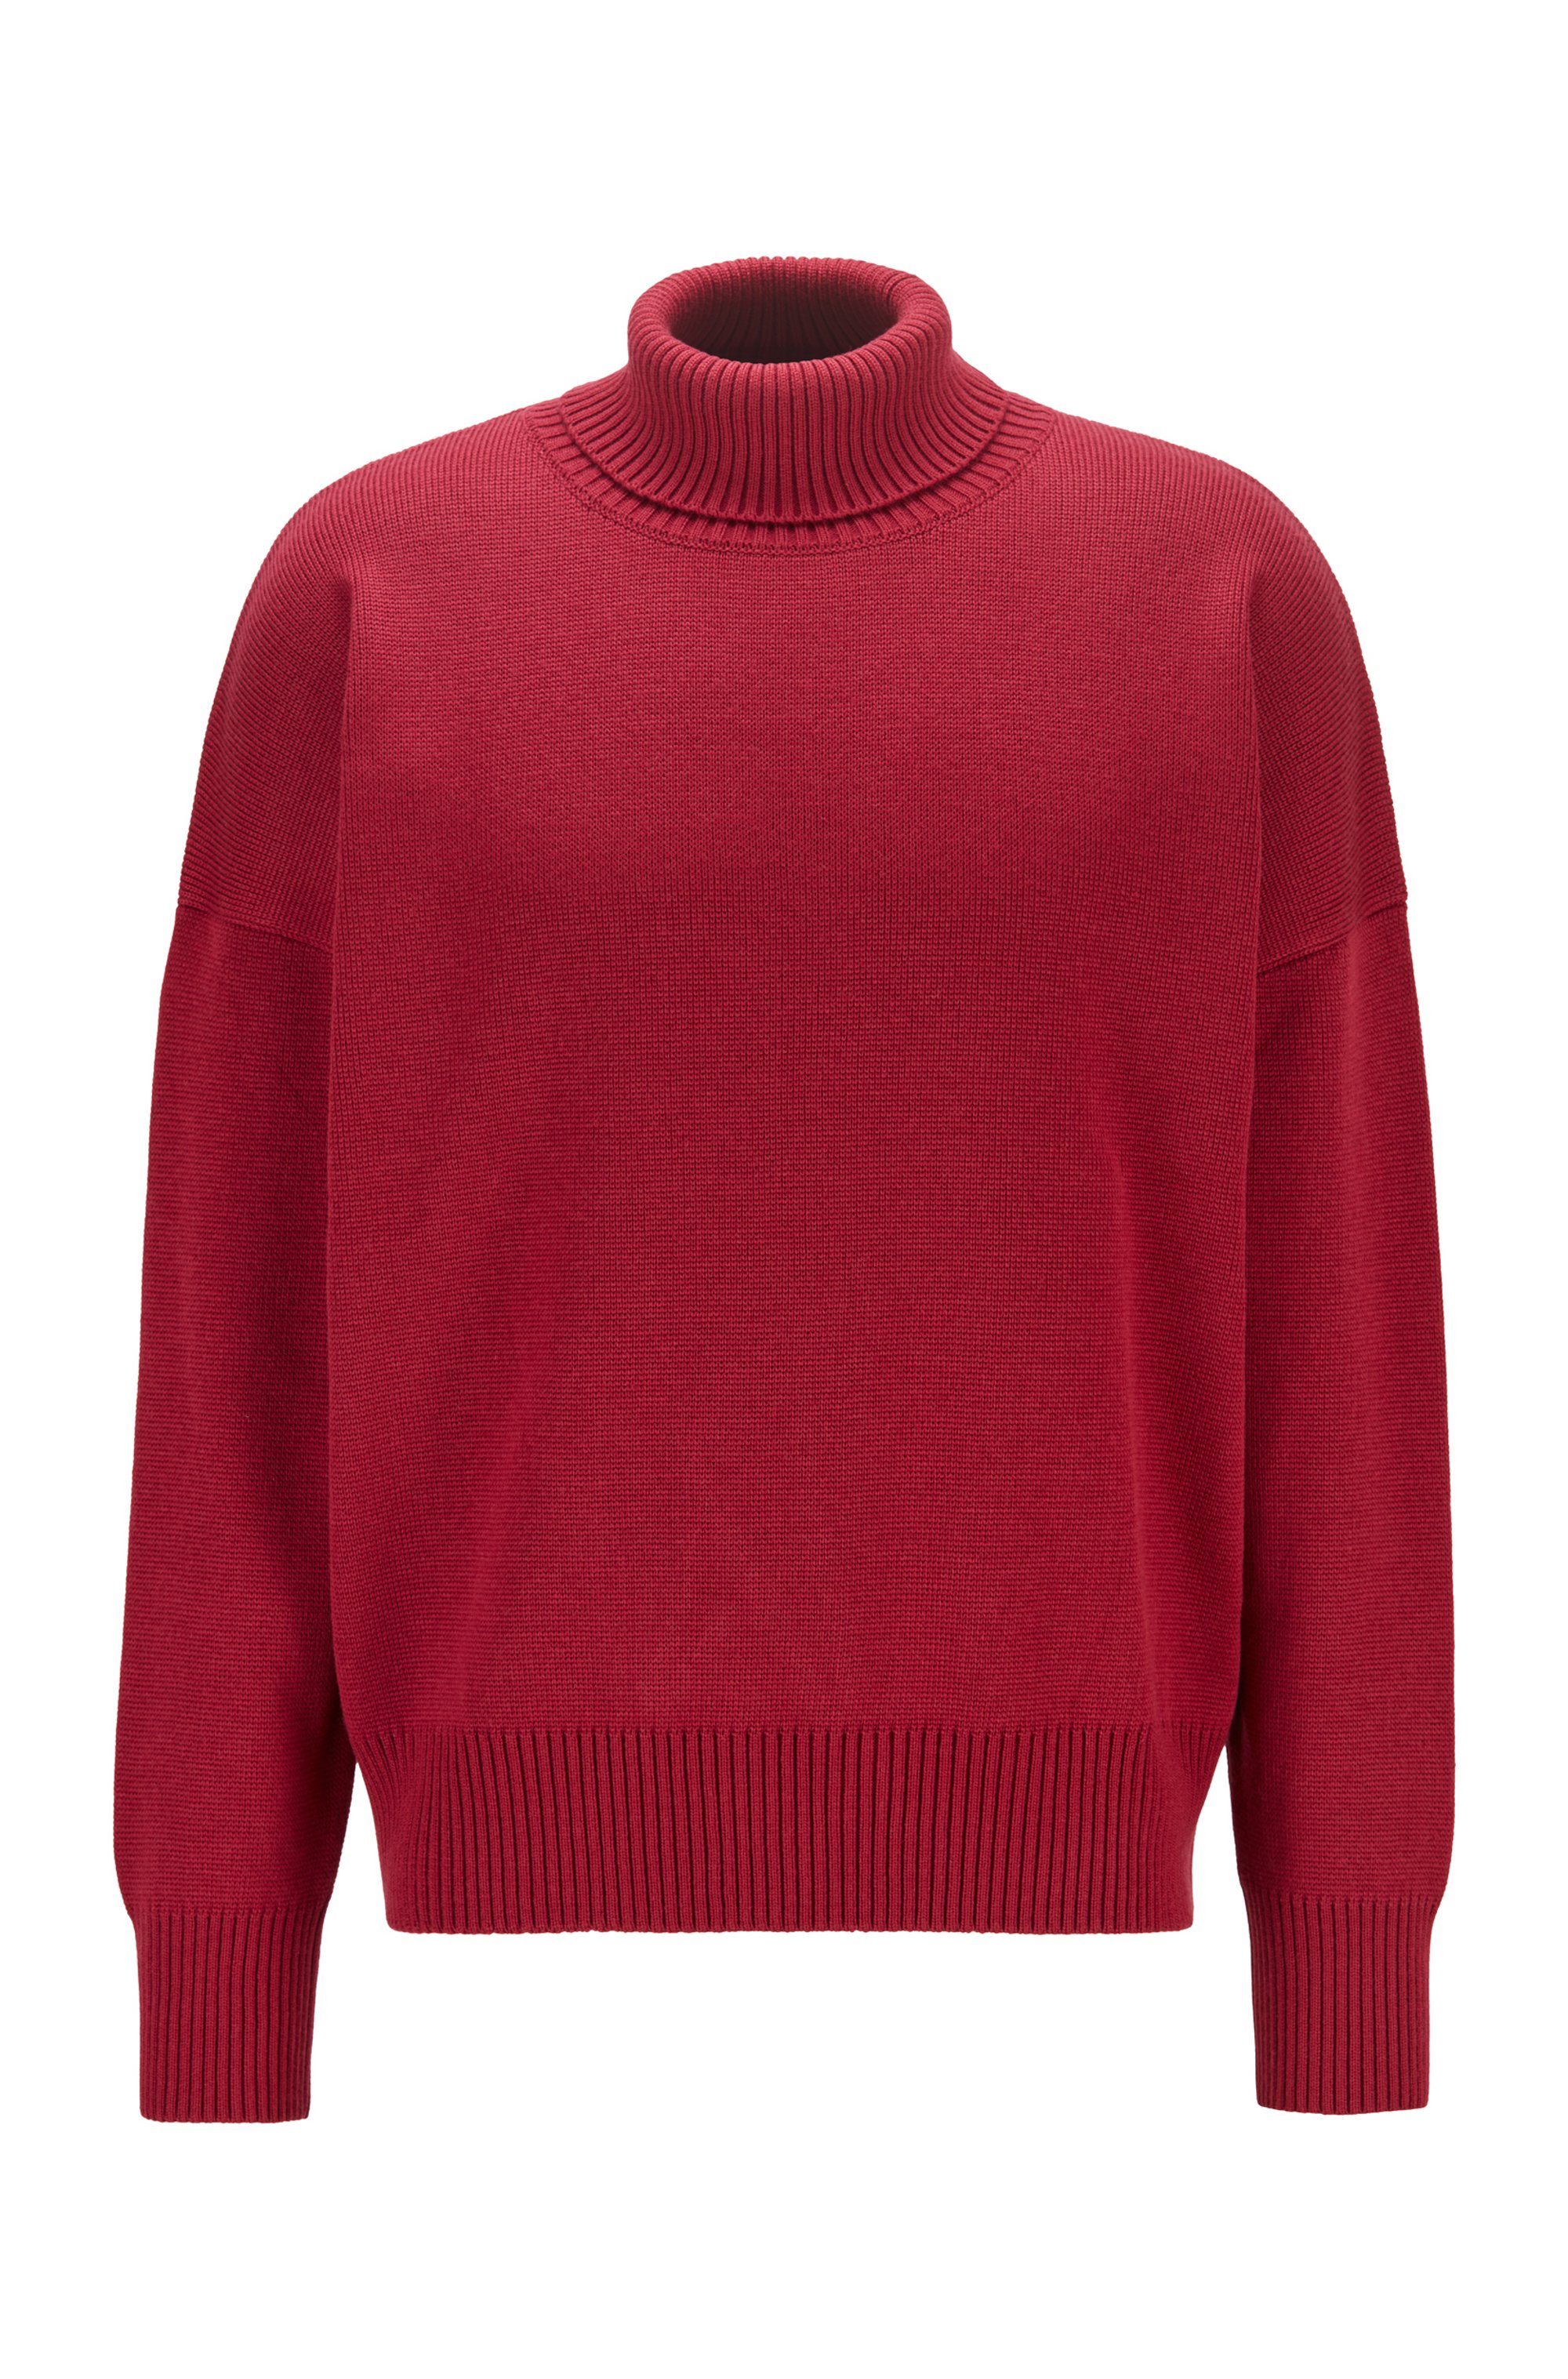 Pull col roulé Relaxed Fit en laine vierge, Rouge sombre